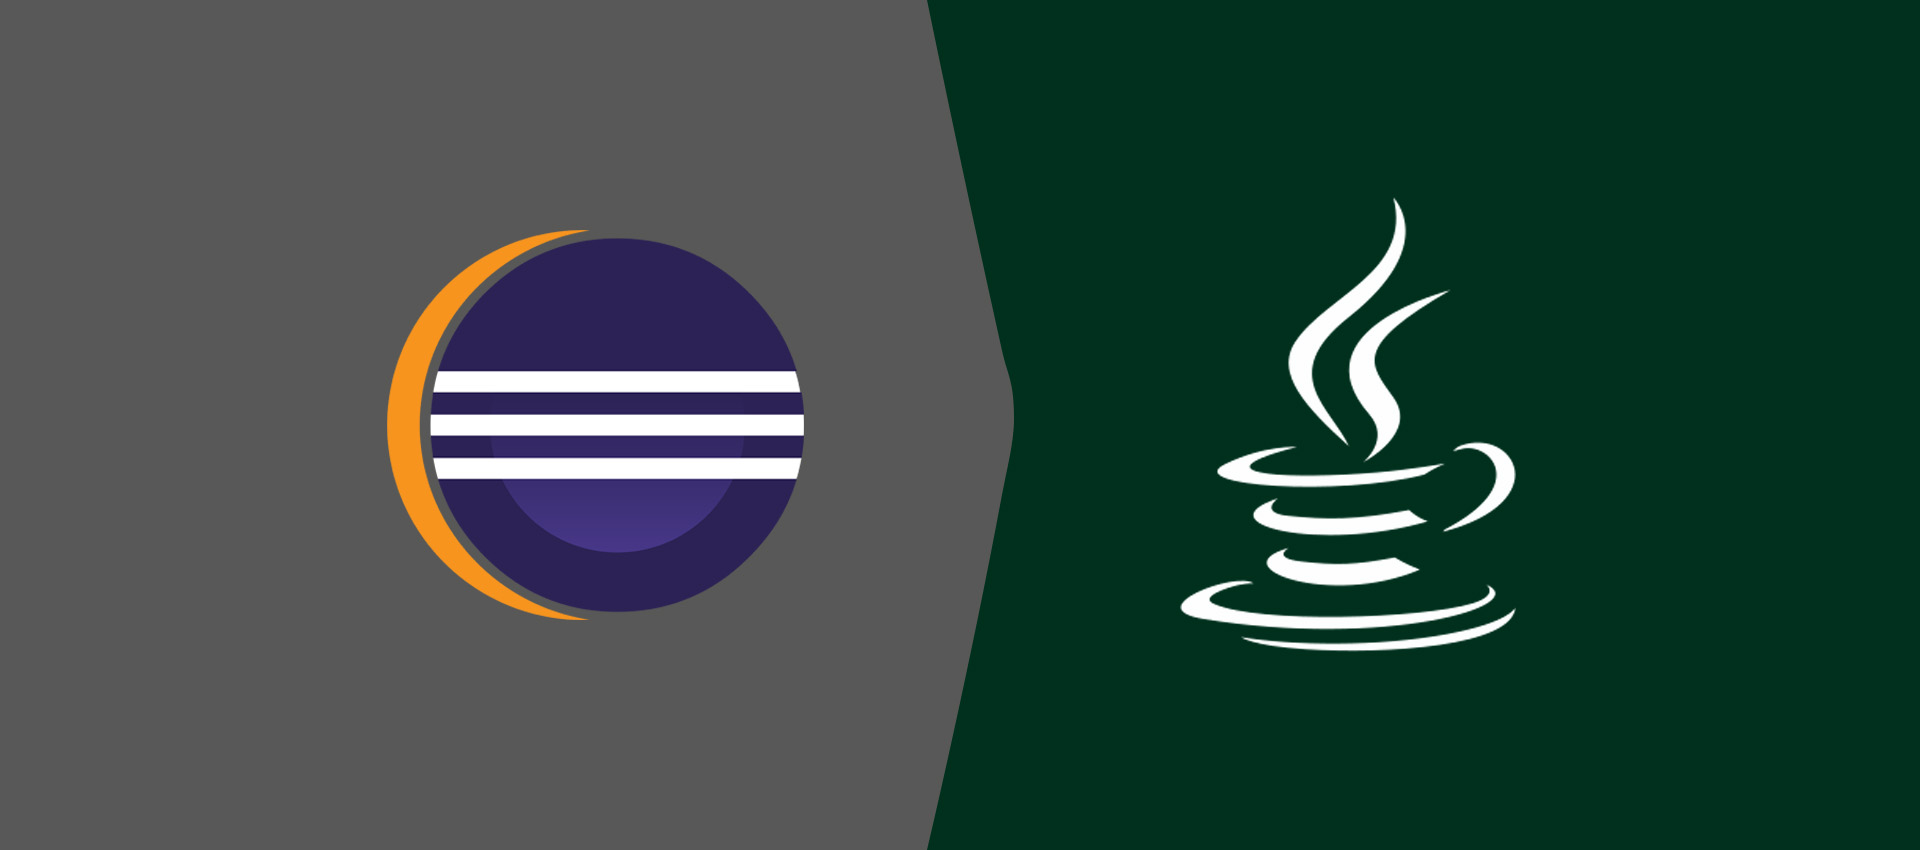 How To Install Eclipse For Java Development On Ubuntu